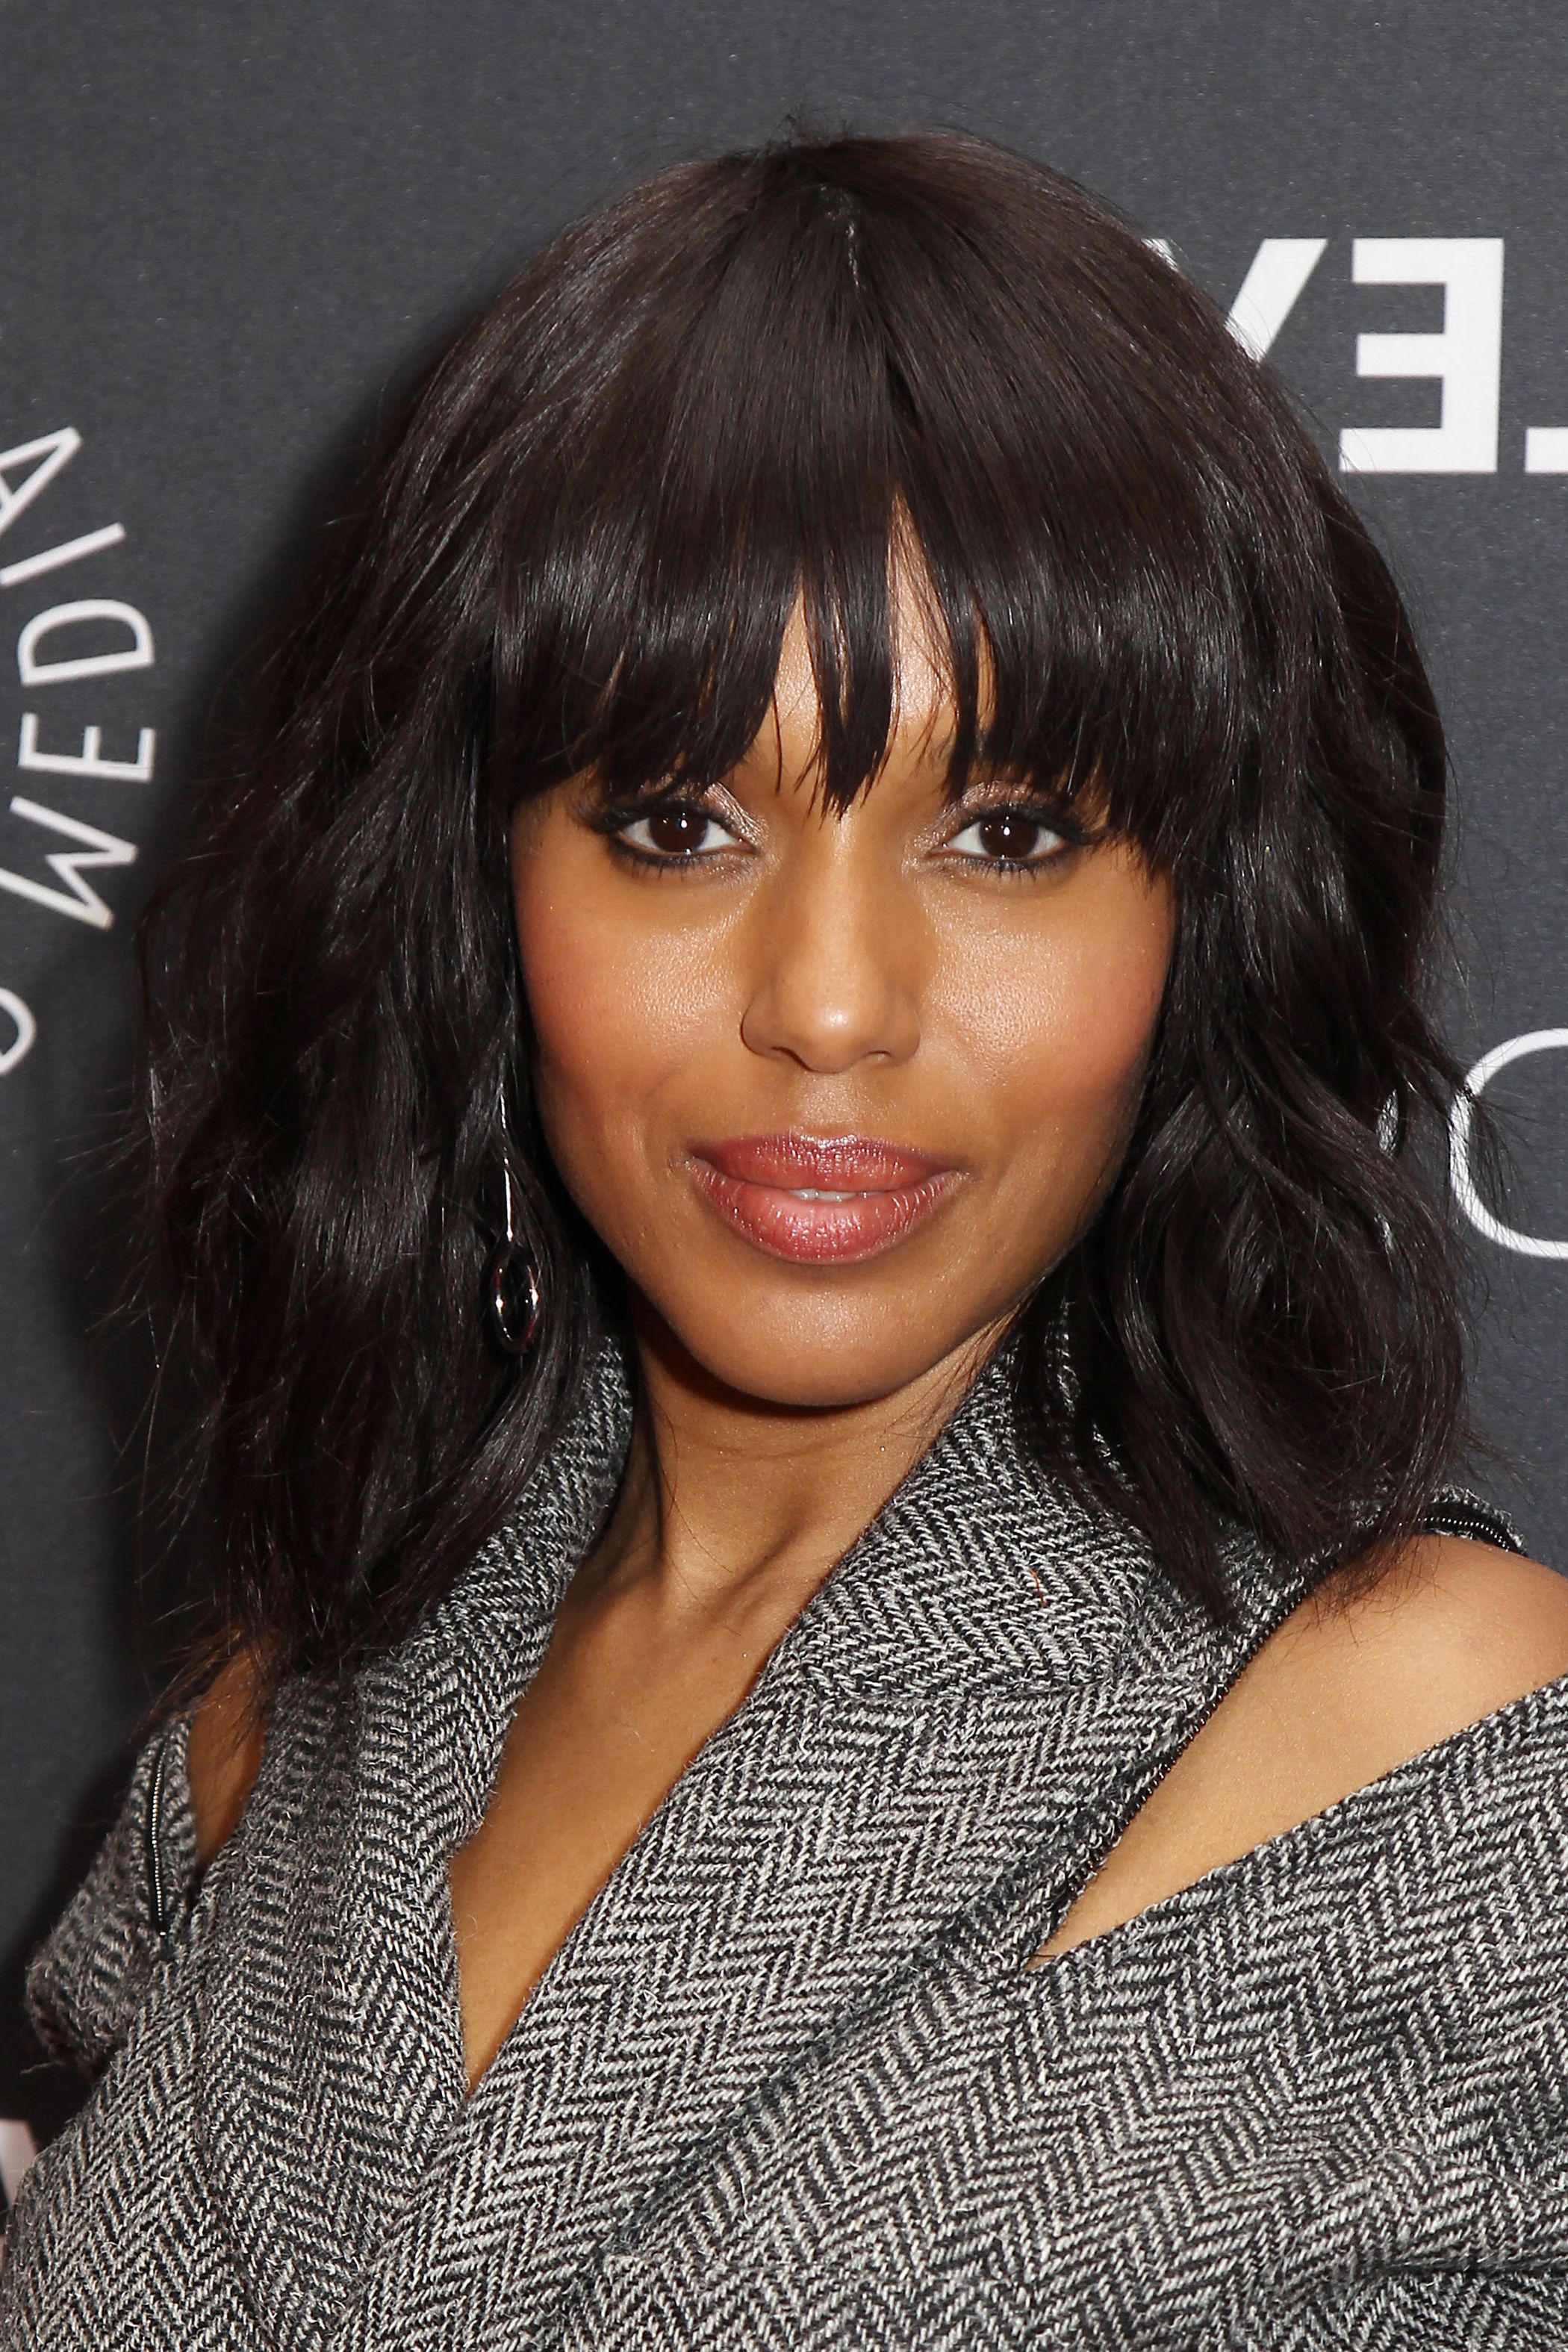 Wavy Hair With Bangs: 7 Star Studded Looks To Try Now Regarding Most Recently Wavy Lob With Choppy Bangs (View 6 of 18)